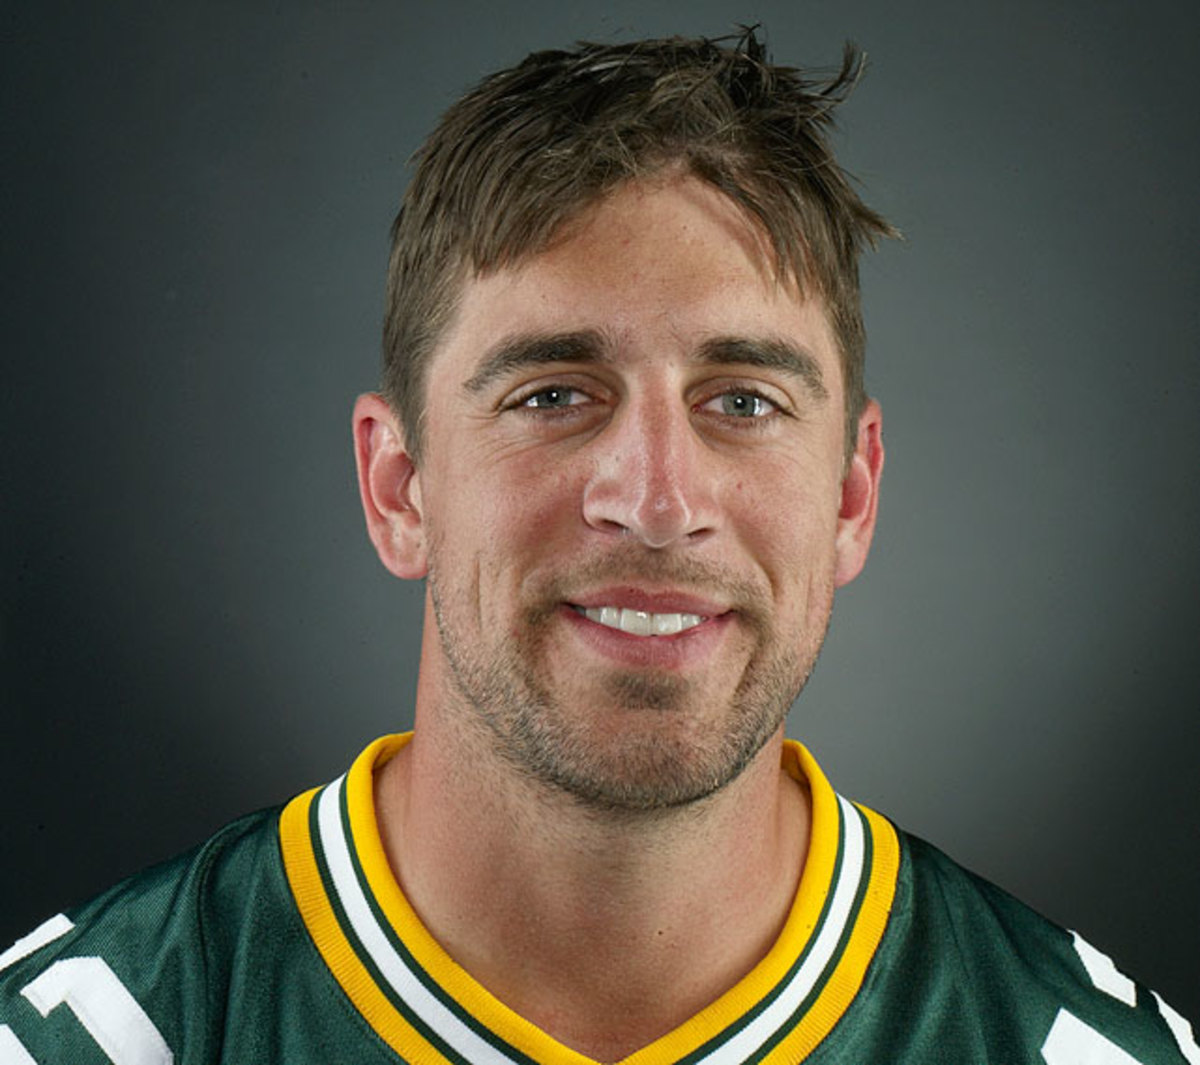 Green Bay Packers Aaron Rodgers gets workout advice from classic SNL